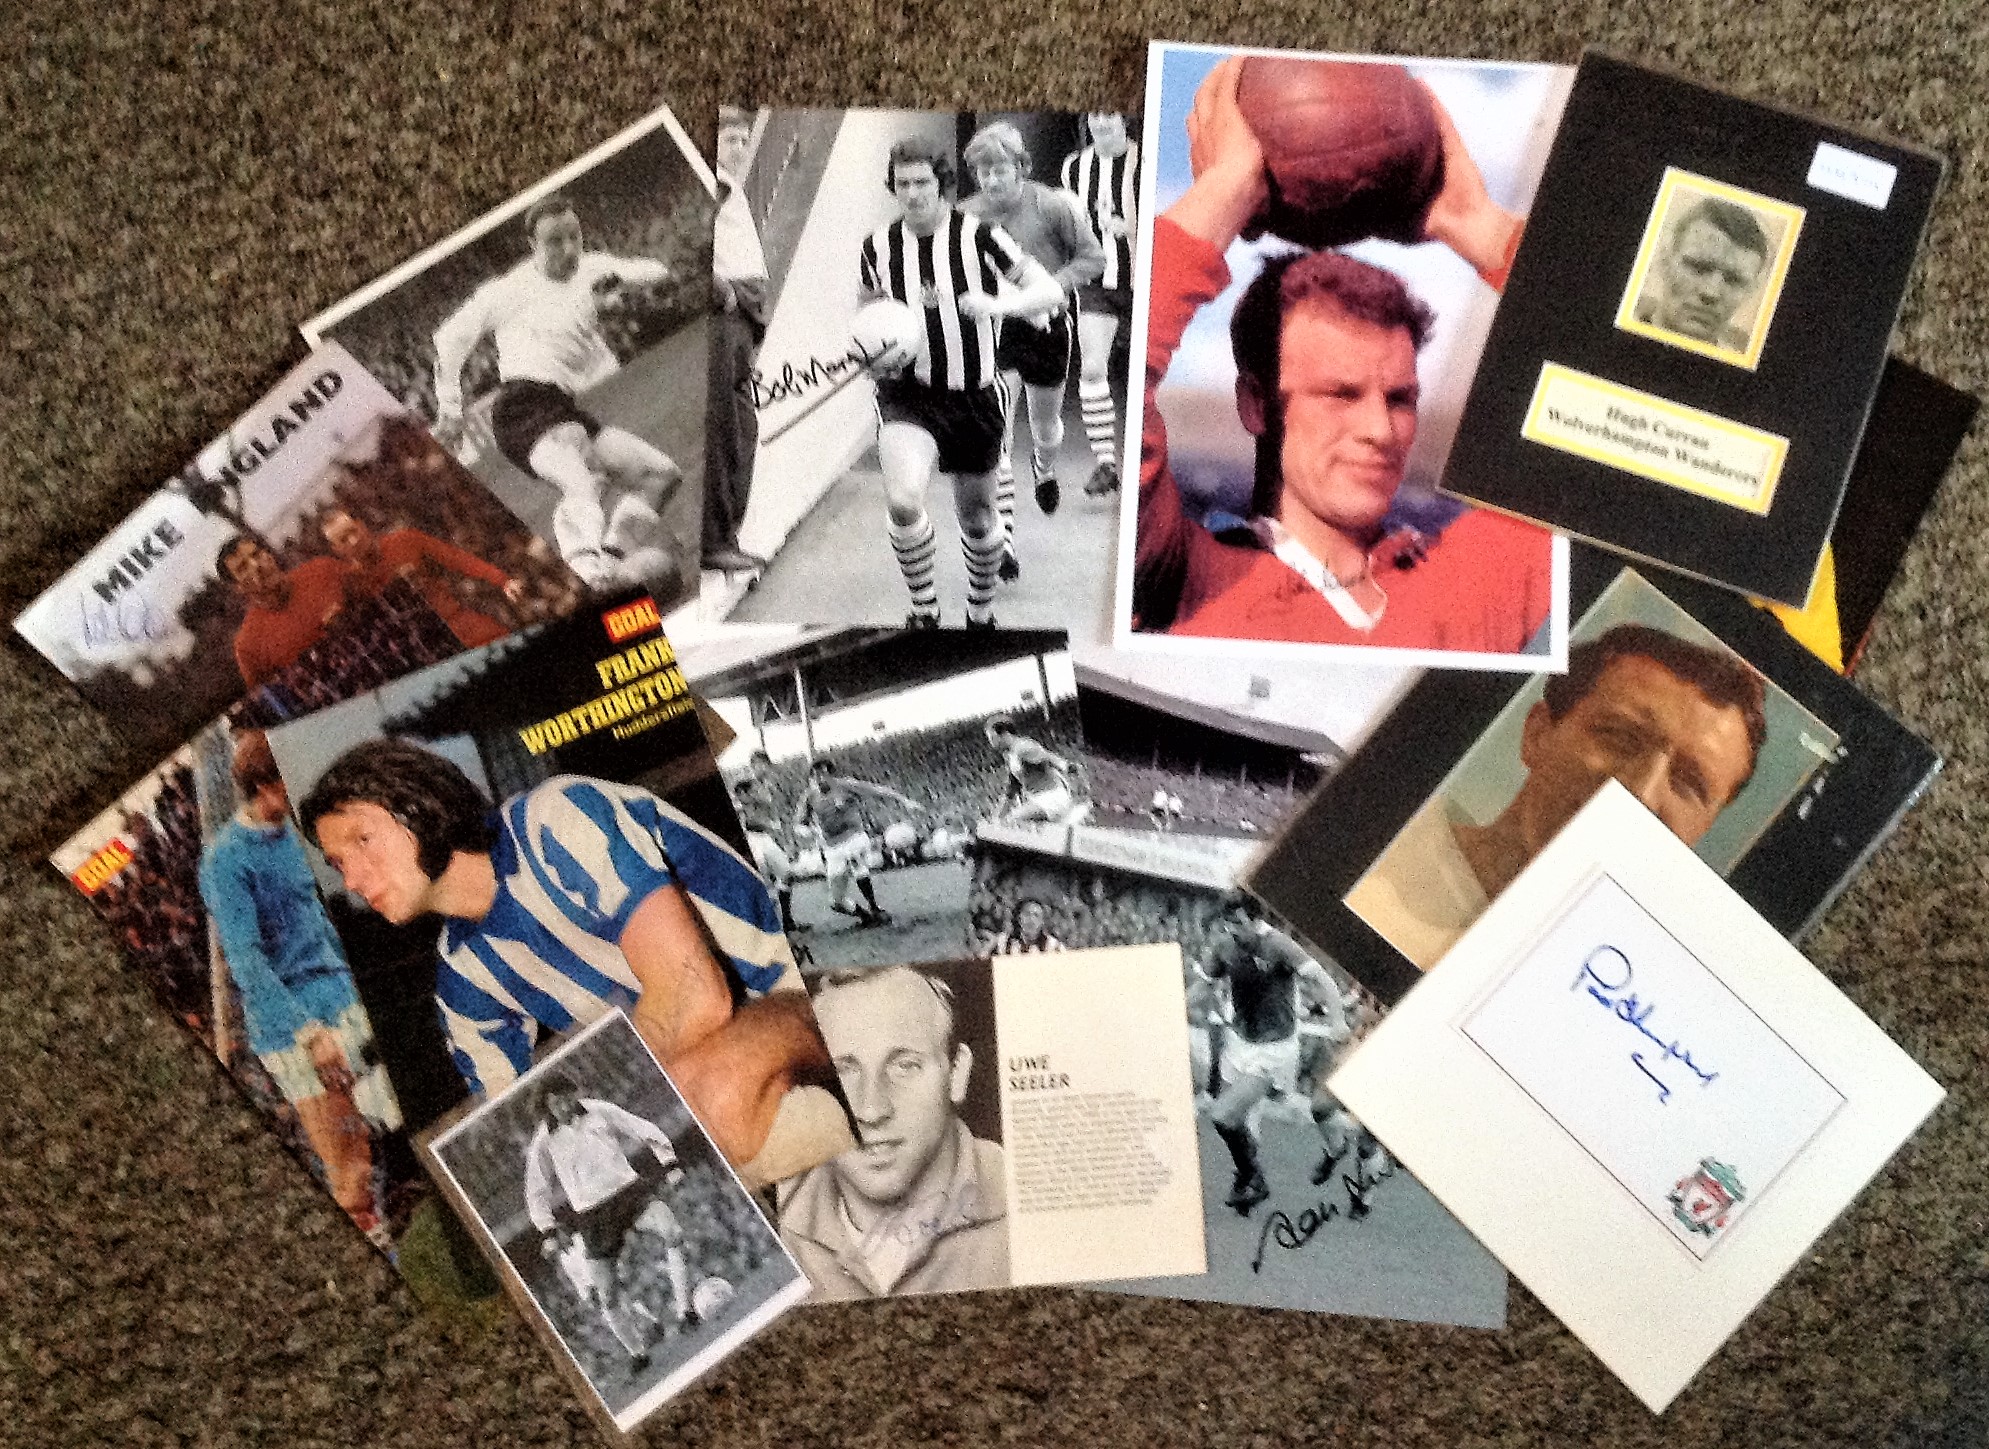 Football Legends collection 14 items includes photos, signature pieces and mounted displays